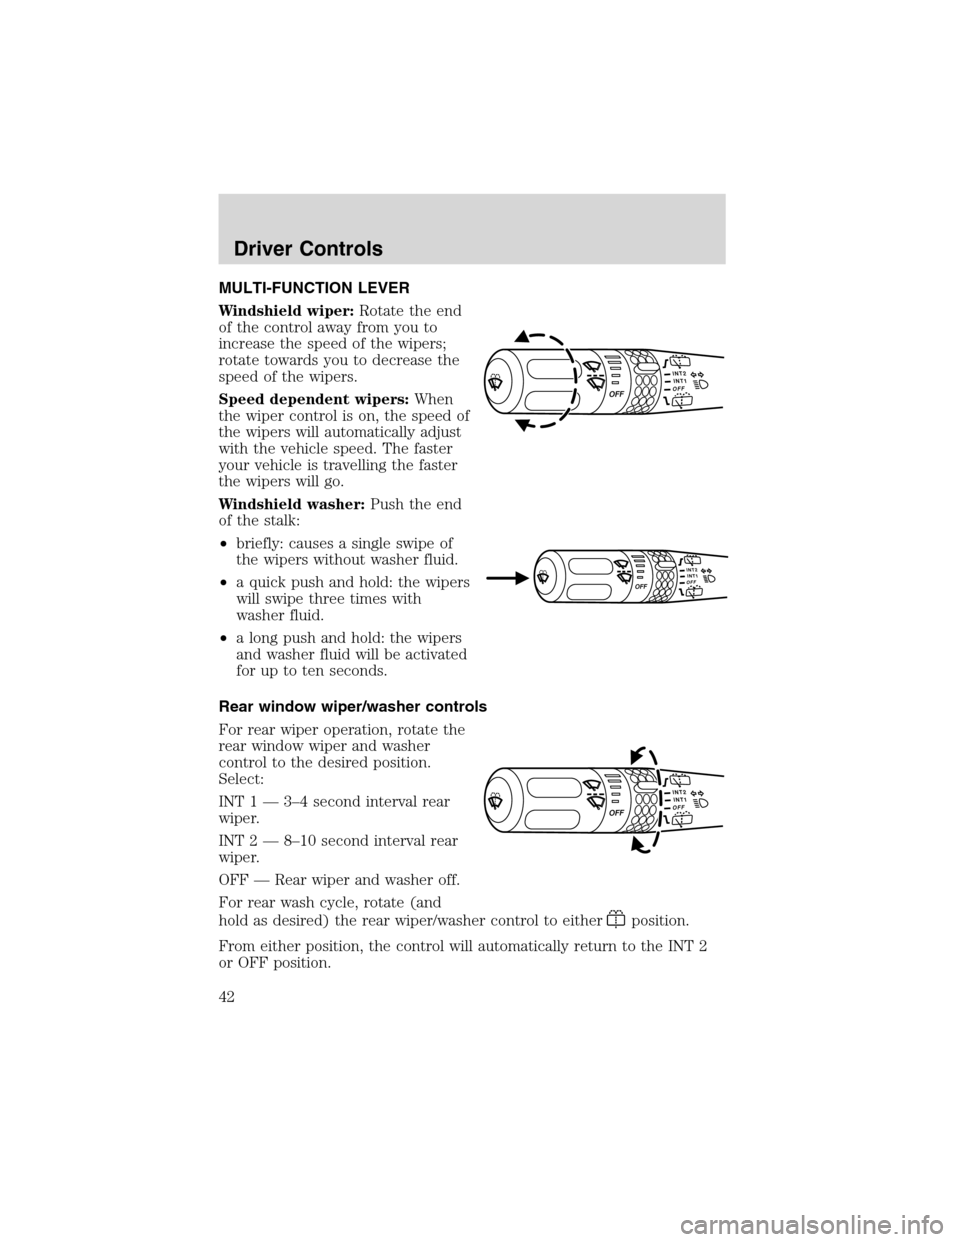 FORD EXPLORER 2003 3.G Service Manual MULTI-FUNCTION LEVER
Windshield wiper:Rotate the end
of the control away from you to
increase the speed of the wipers;
rotate towards you to decrease the
speed of the wipers.
Speed dependent wipers:Wh